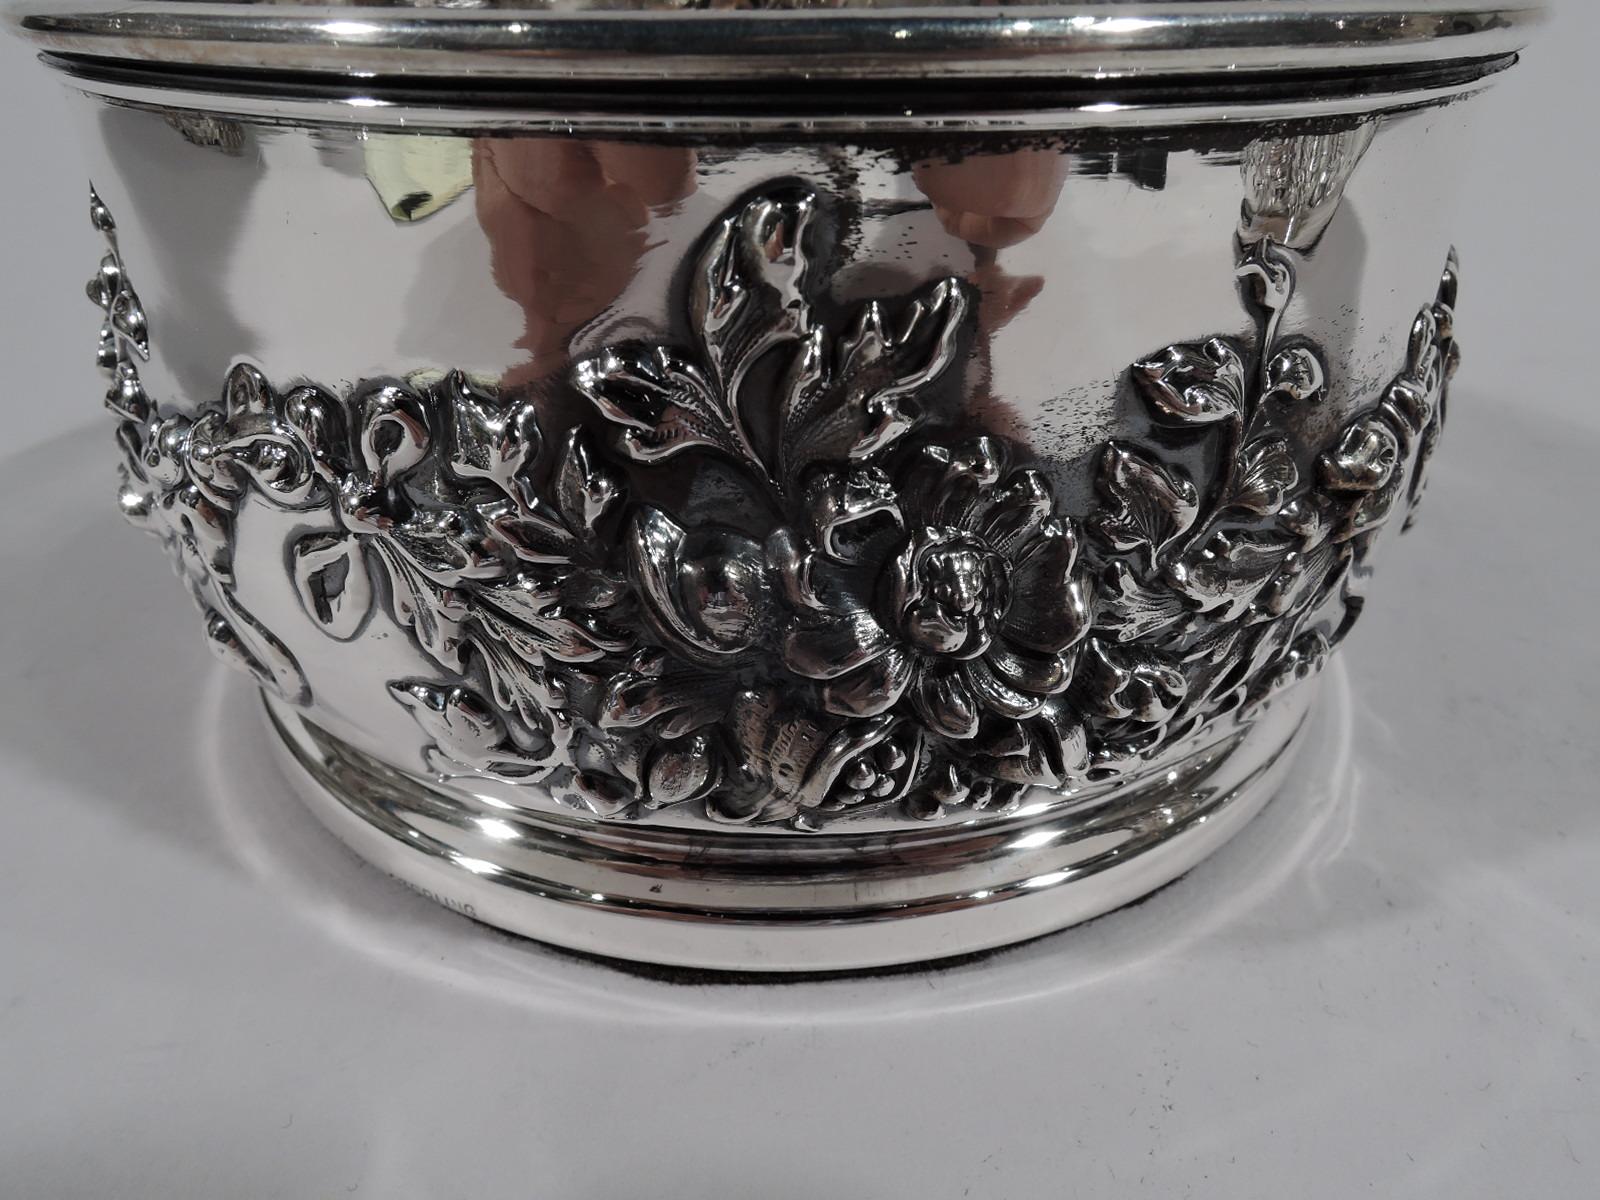 Pair of wedding-gift quality American sterling silver wine bottle coasters, circa 1890. Round with chased garland—bunched ribbon-tied flowers. Three-letter script monogram. Wood bottom. Marked “Sterling” and “925/1000 Fine”. One numbered 4603. Total